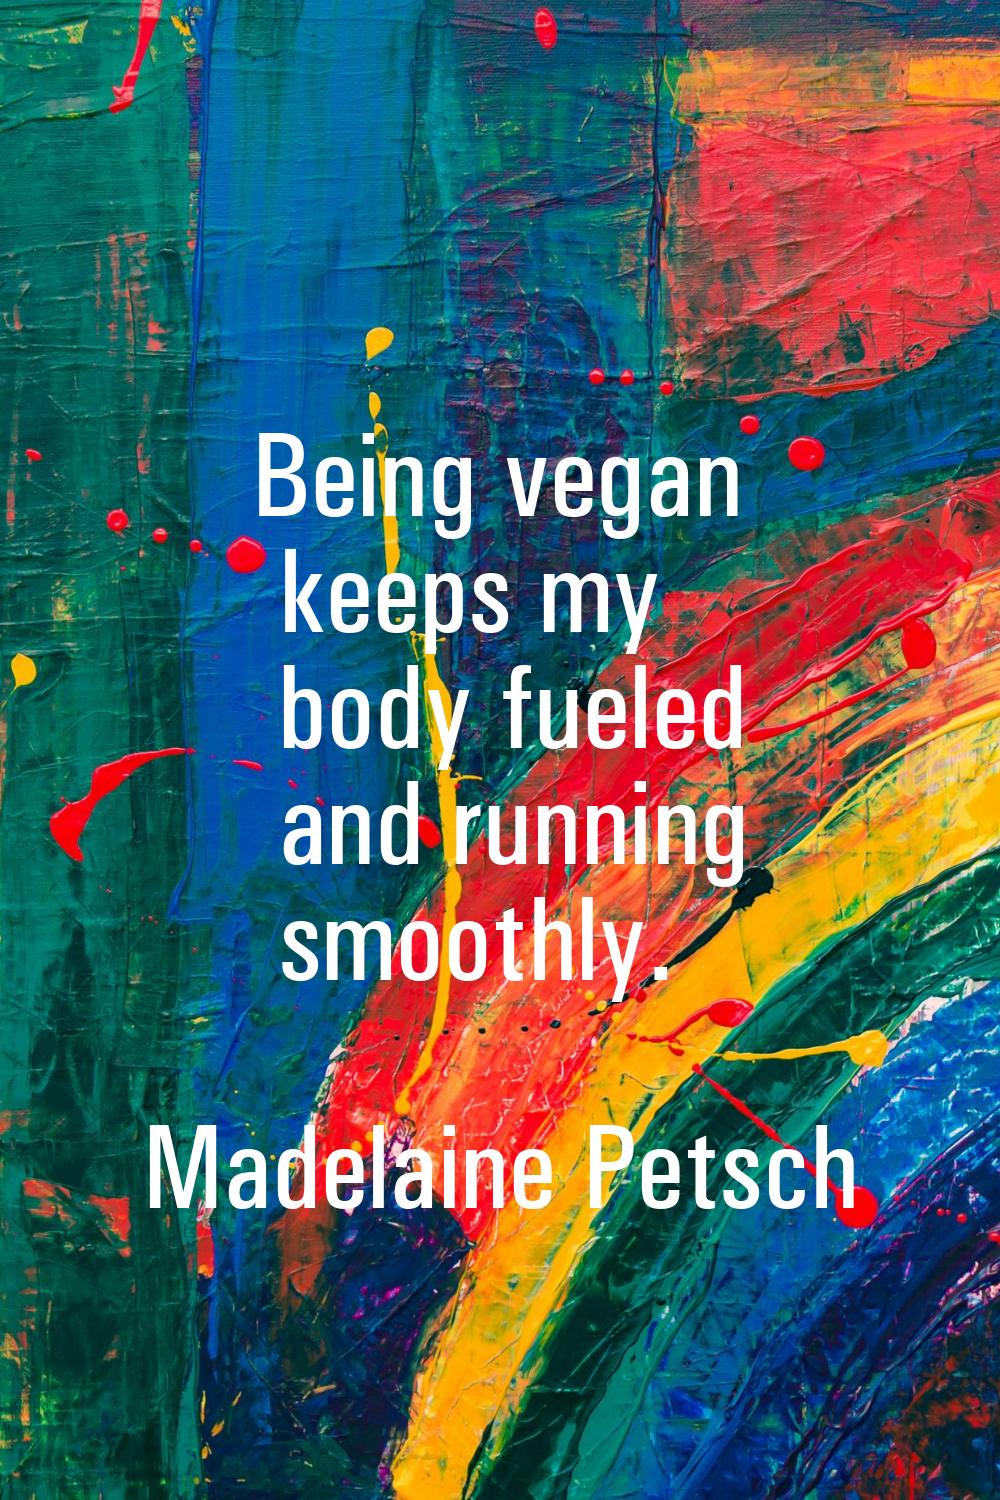 Being vegan keeps my body fueled and running smoothly.